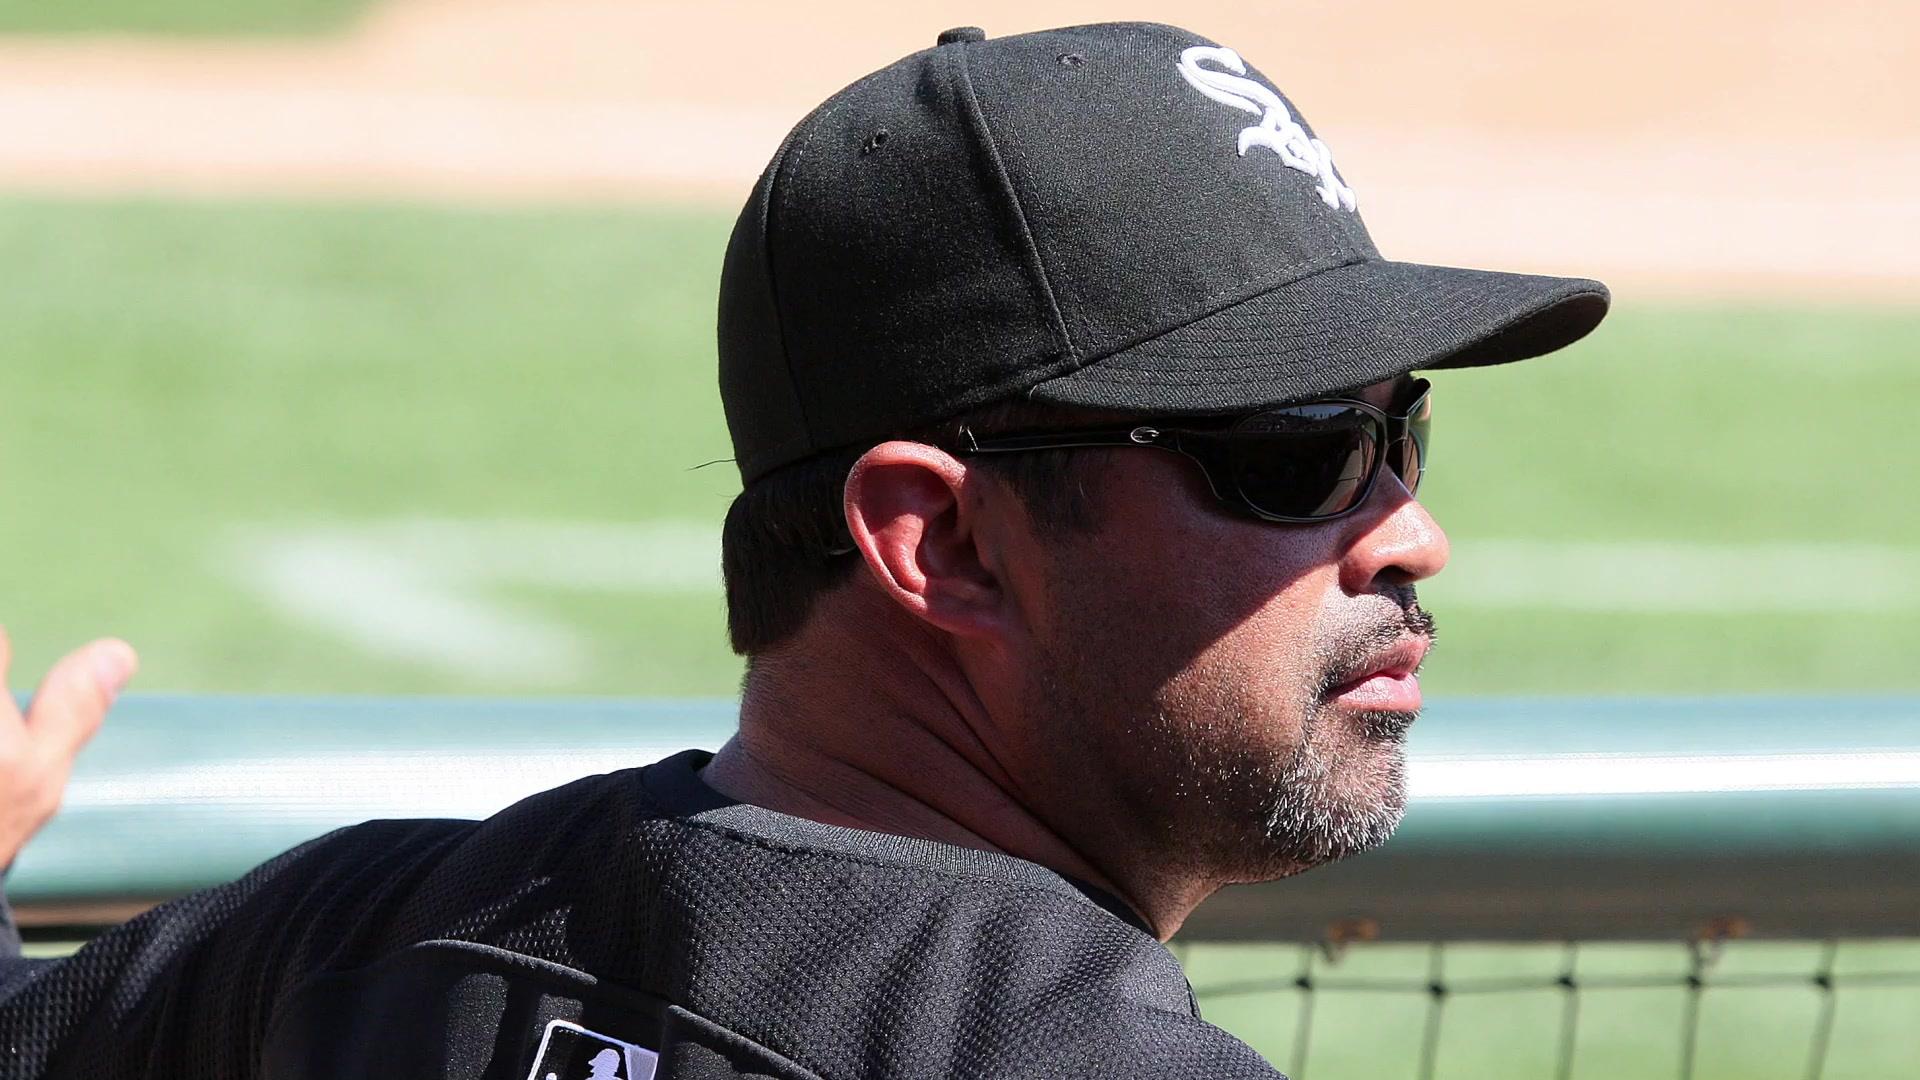 Detroit Tigers should at least talk to Ozzie Guillen about manager job